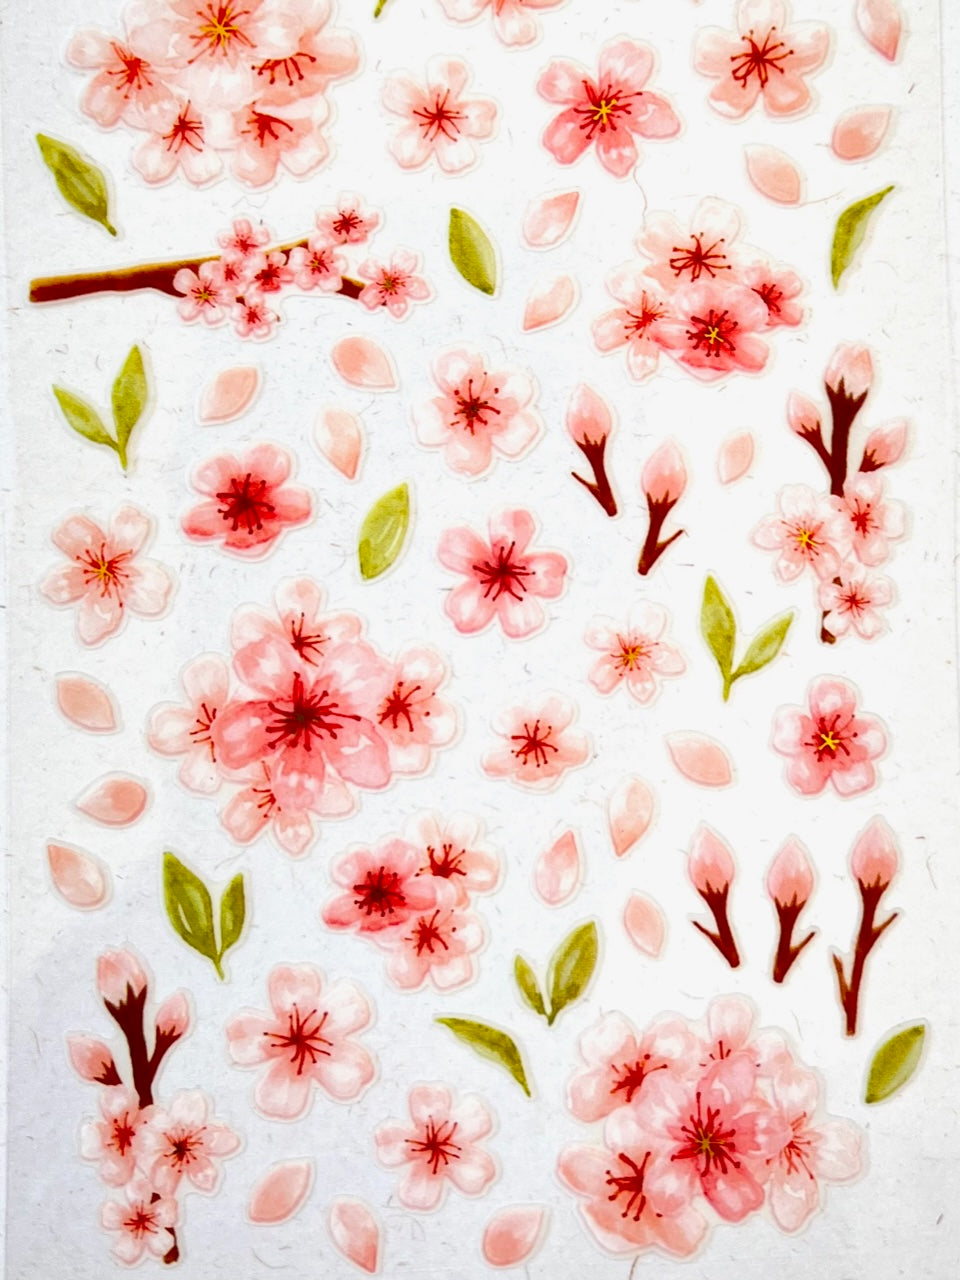 01086 WATER BLOSSOM STICKERS-12